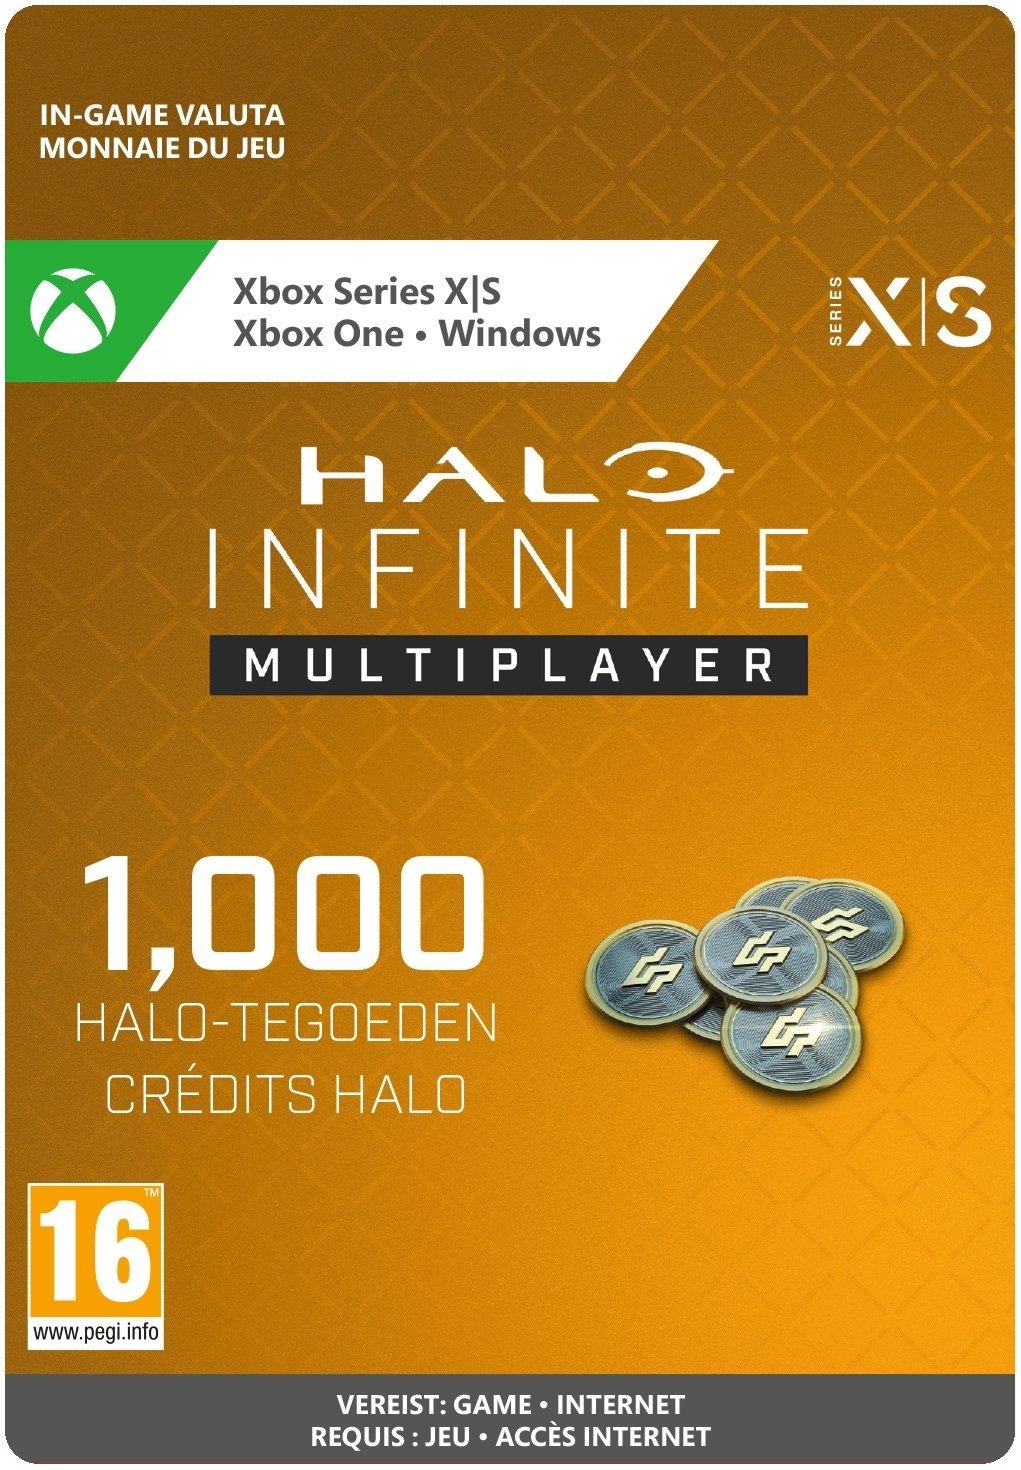 Halo Infinite: 1000 Halo Credits - Xbox Series X/Xbox One/Win10 - Currency | 7LM-00041 (6cefd355-811a-6846-b062-5fa163eded3a)